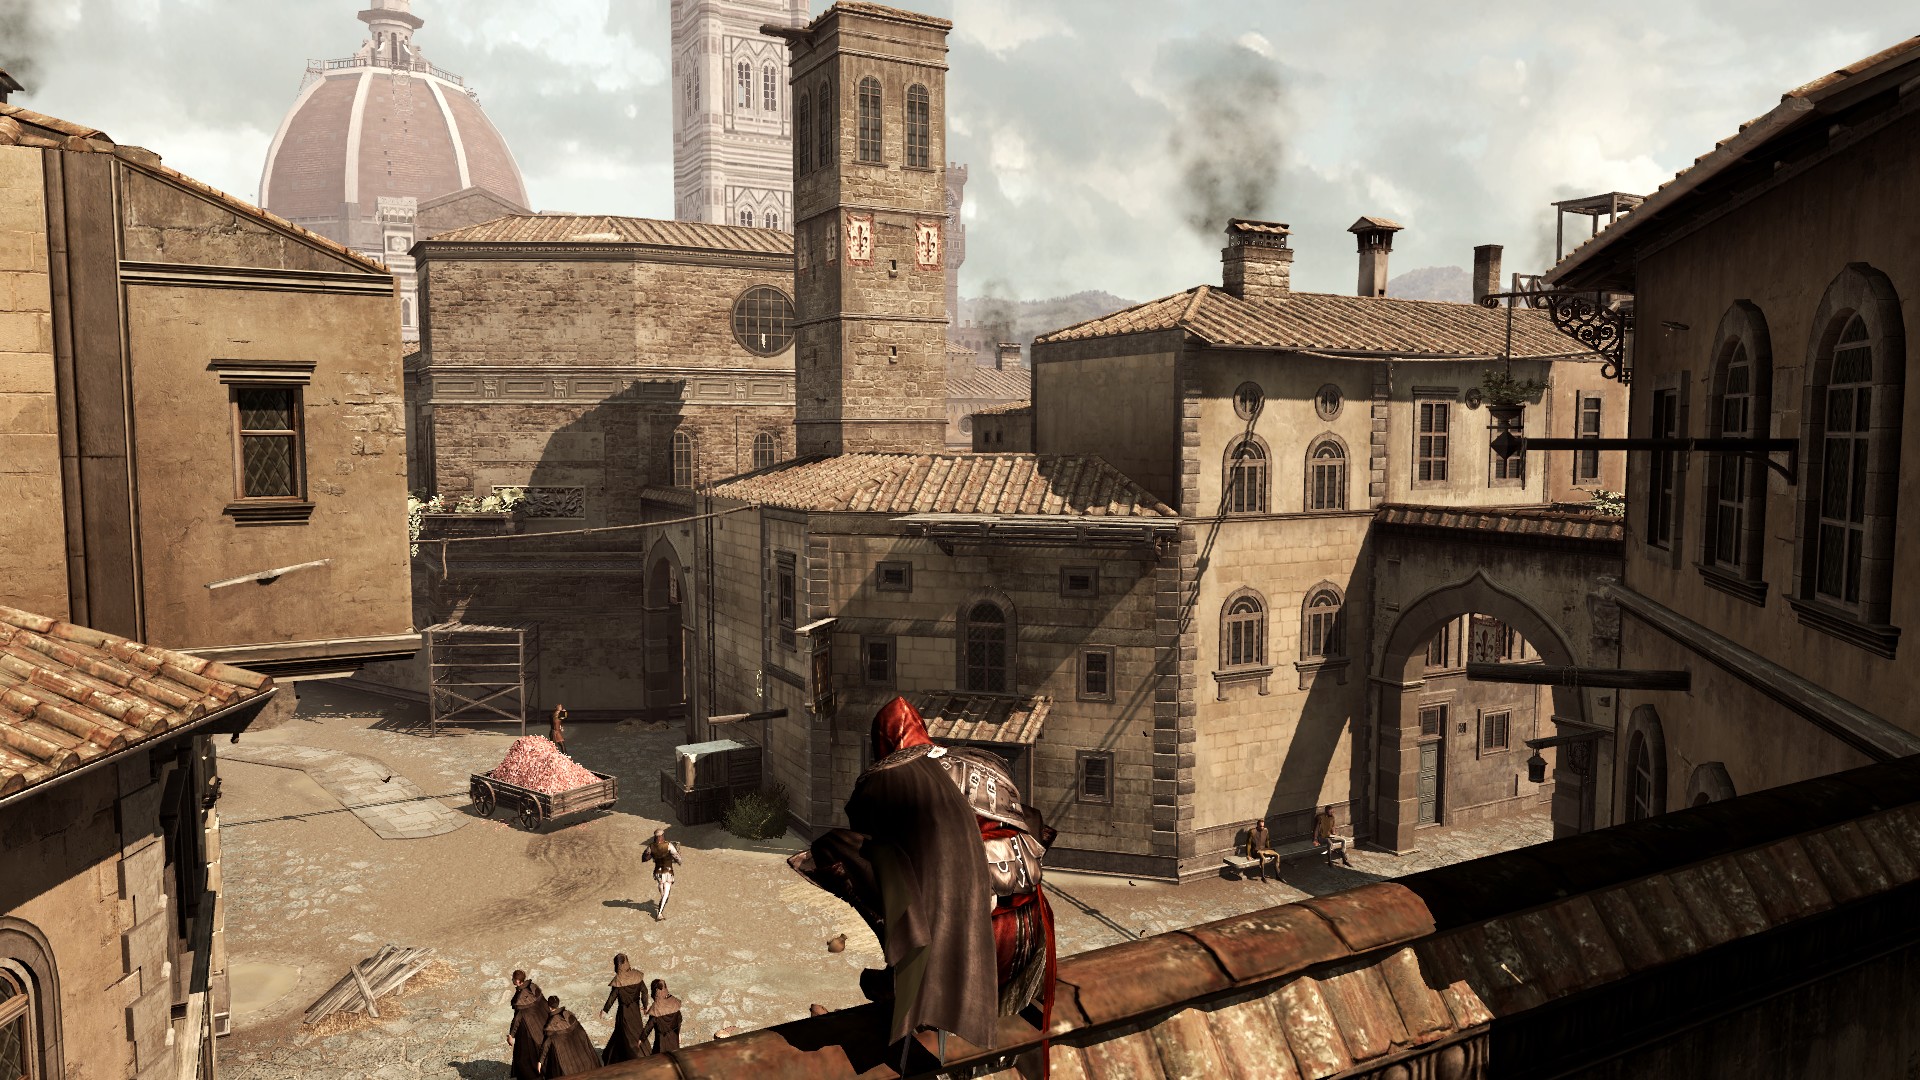 Assassin's Creed II - Free (Available Now) on Uplay : r/assassinscreed